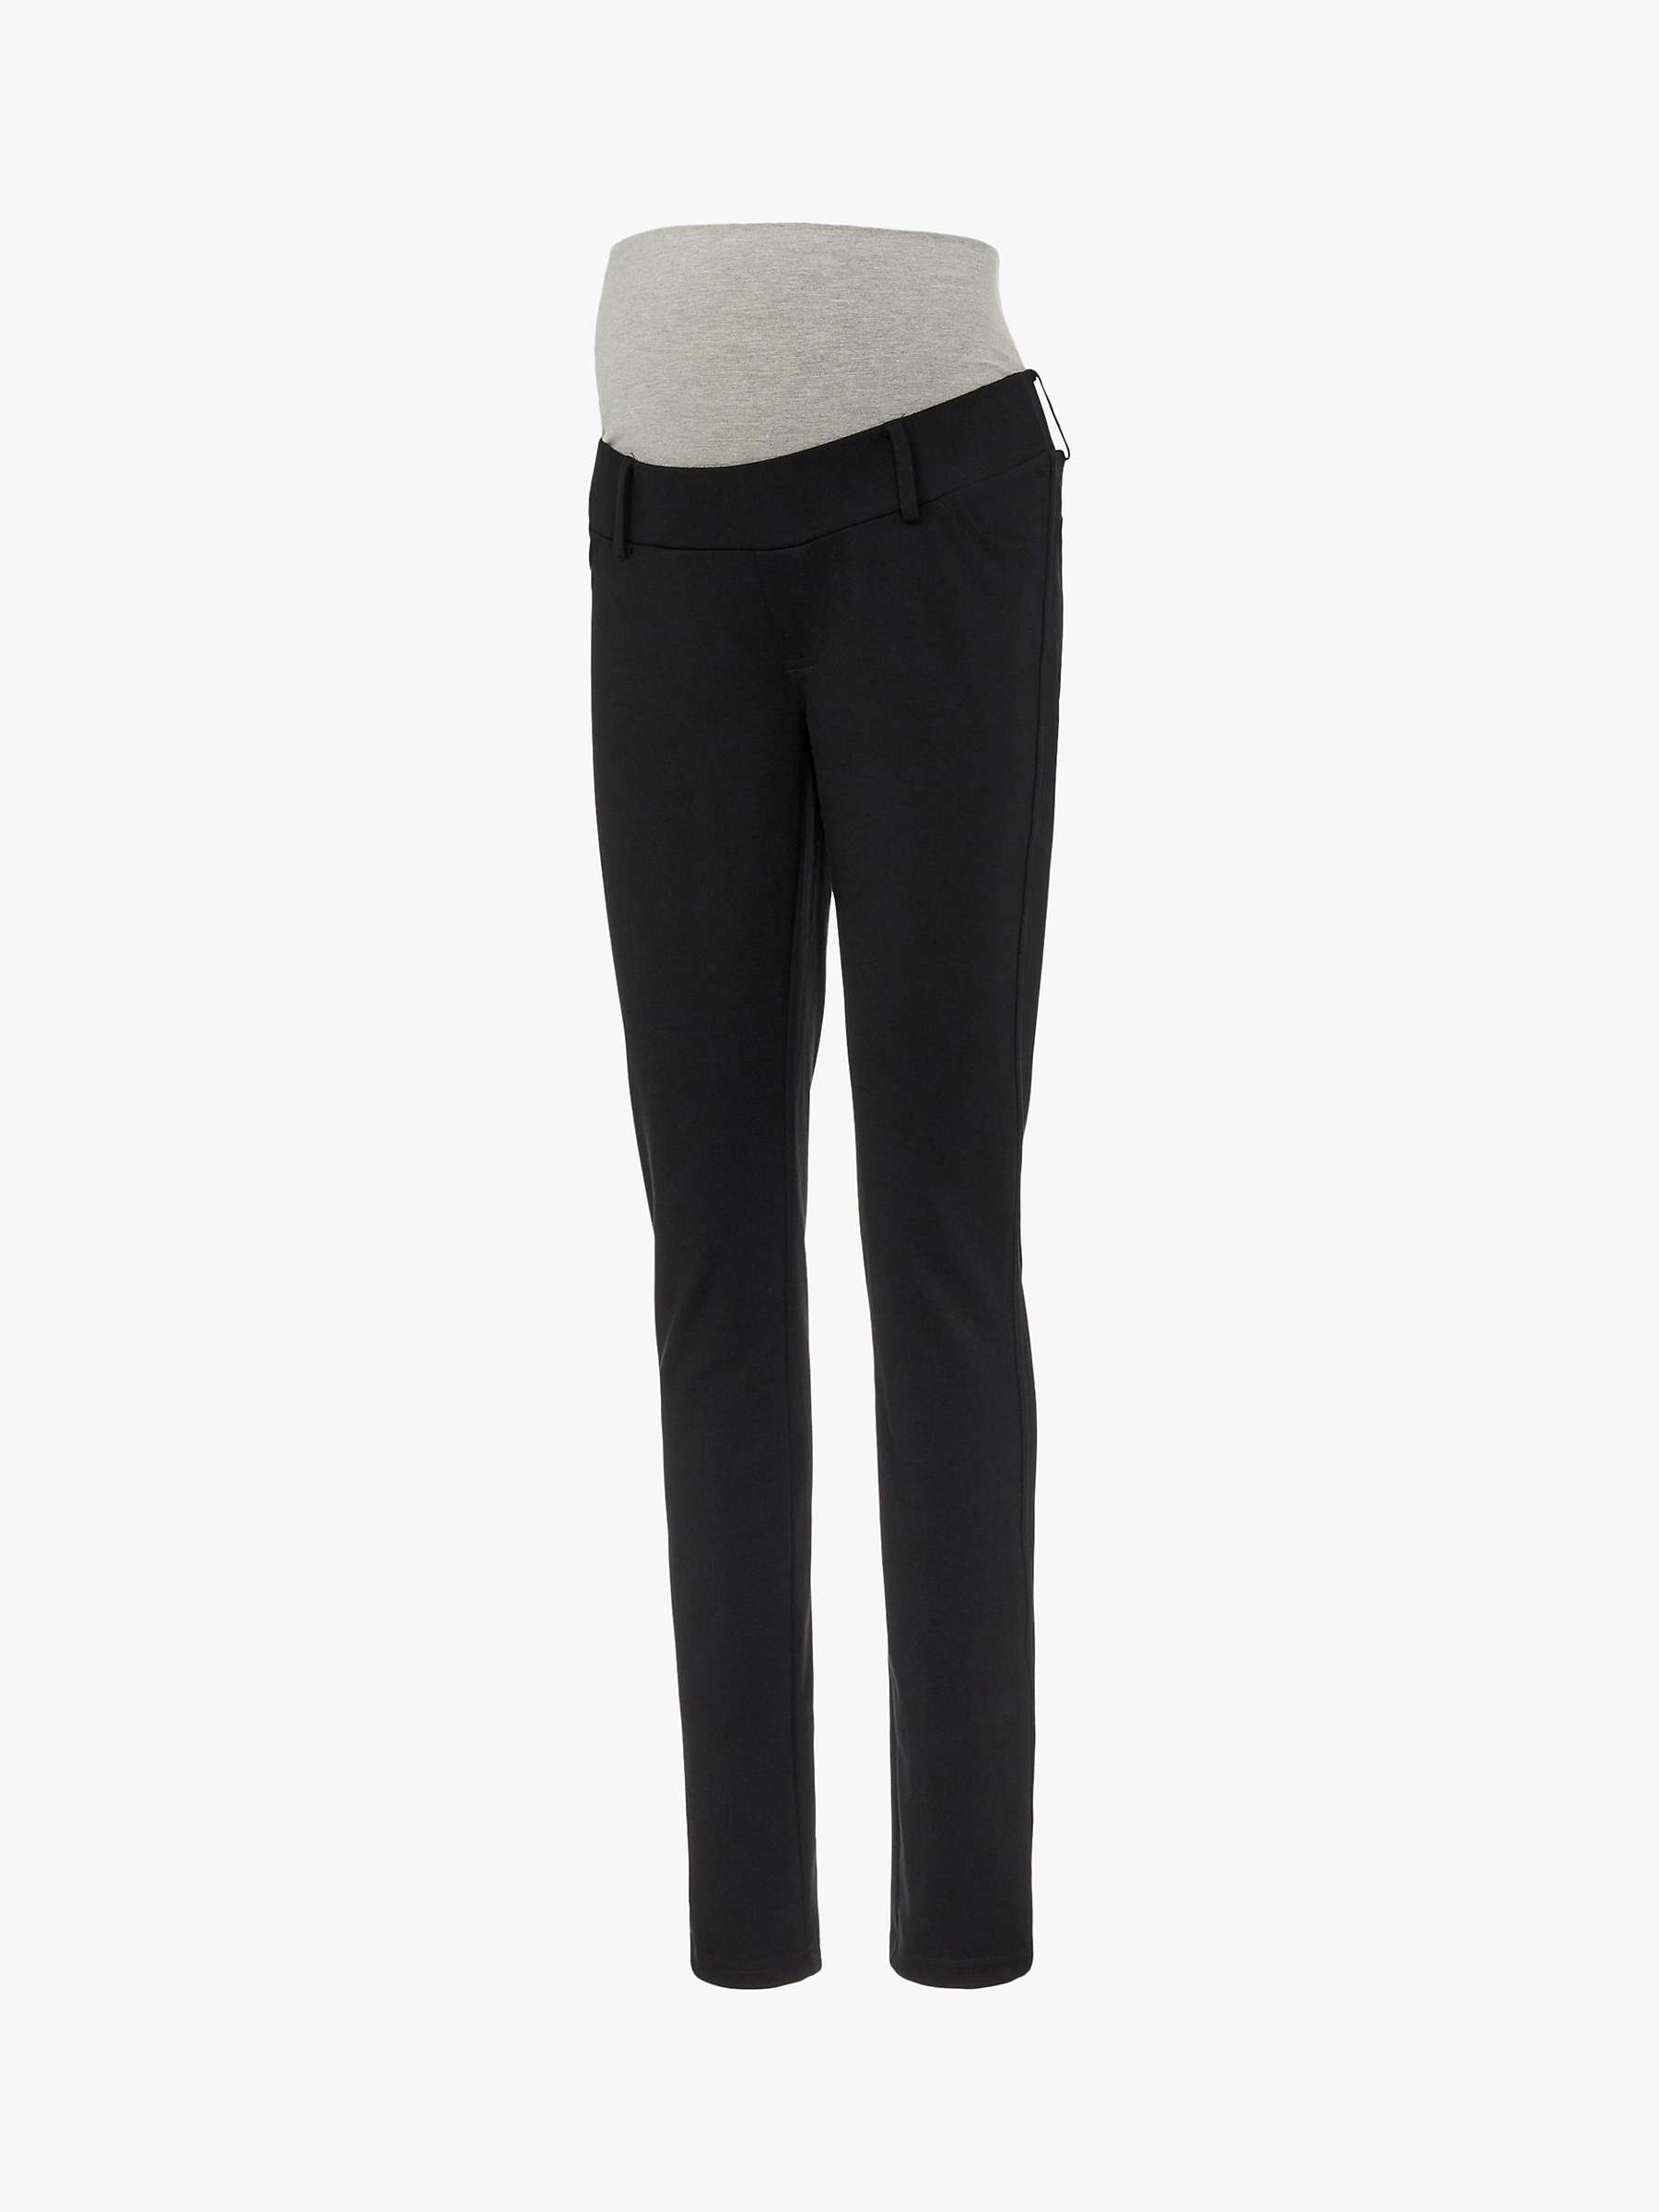 Buy Mamalicious Alba Jersey Maternity Trousers, Black Online at johnlewis.com